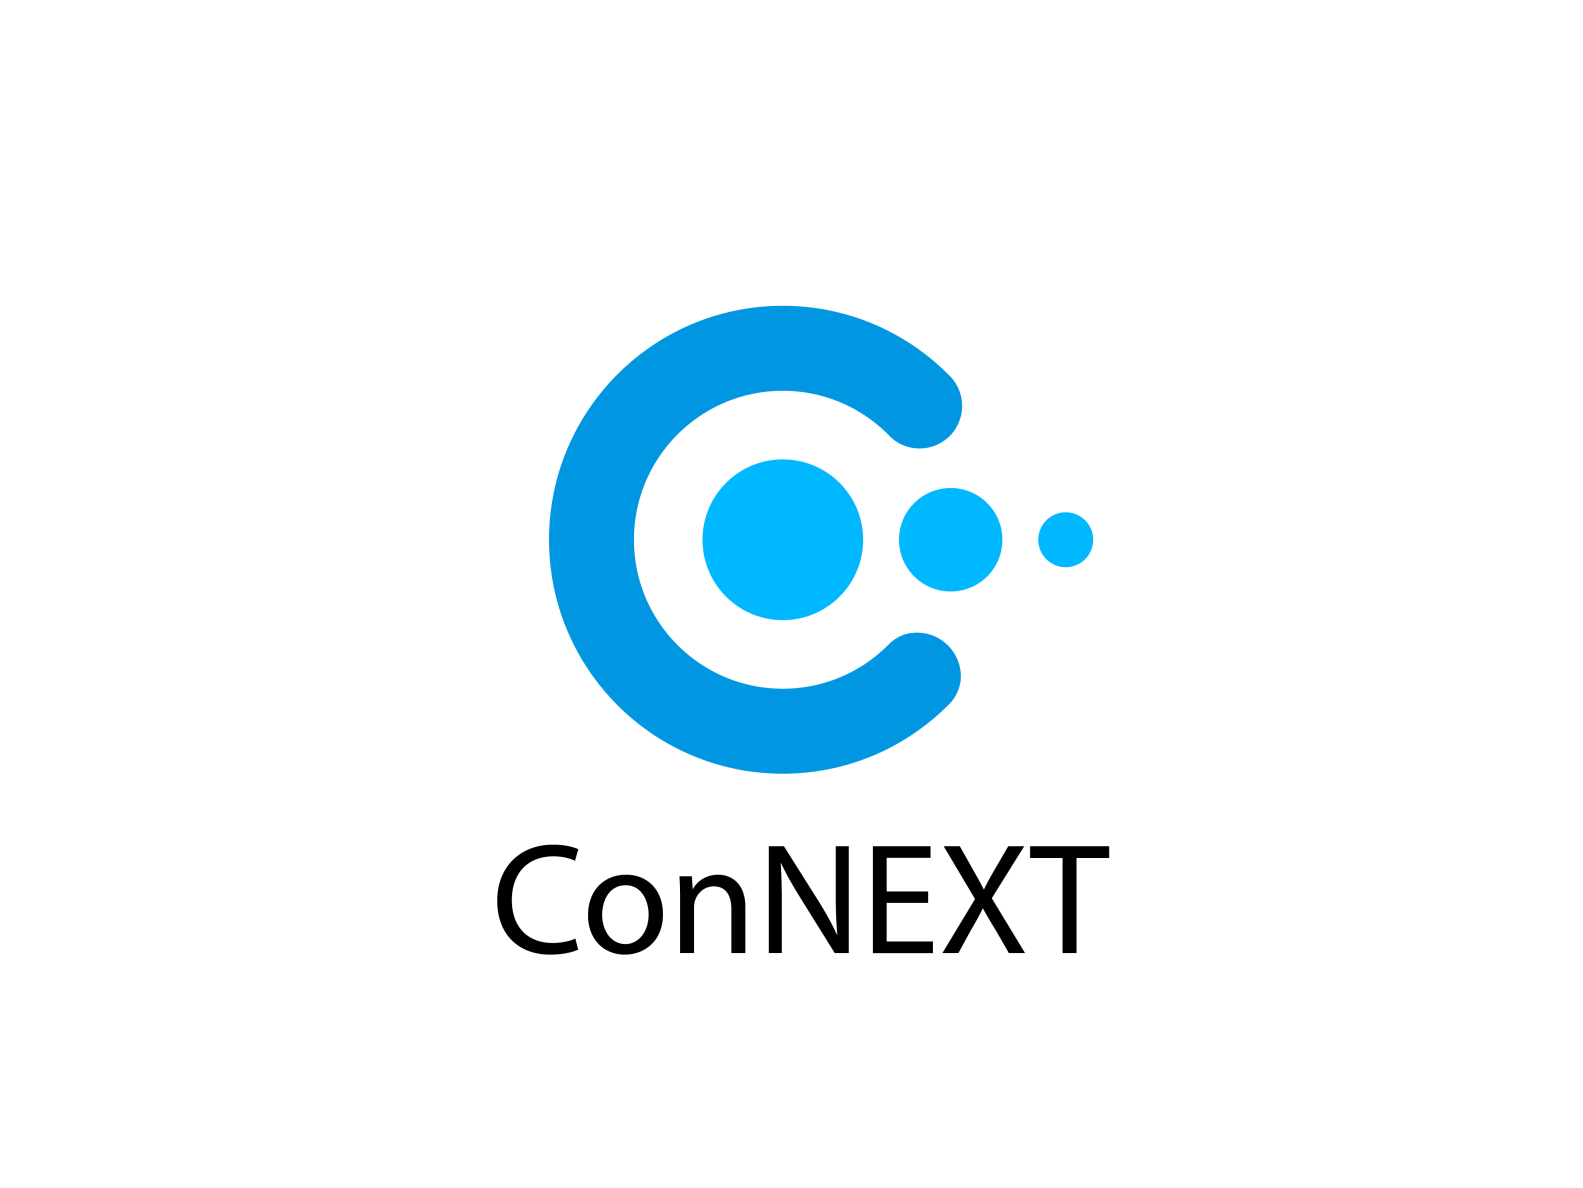 CONNECT LOGO by Nur Fauzi on Dribbble